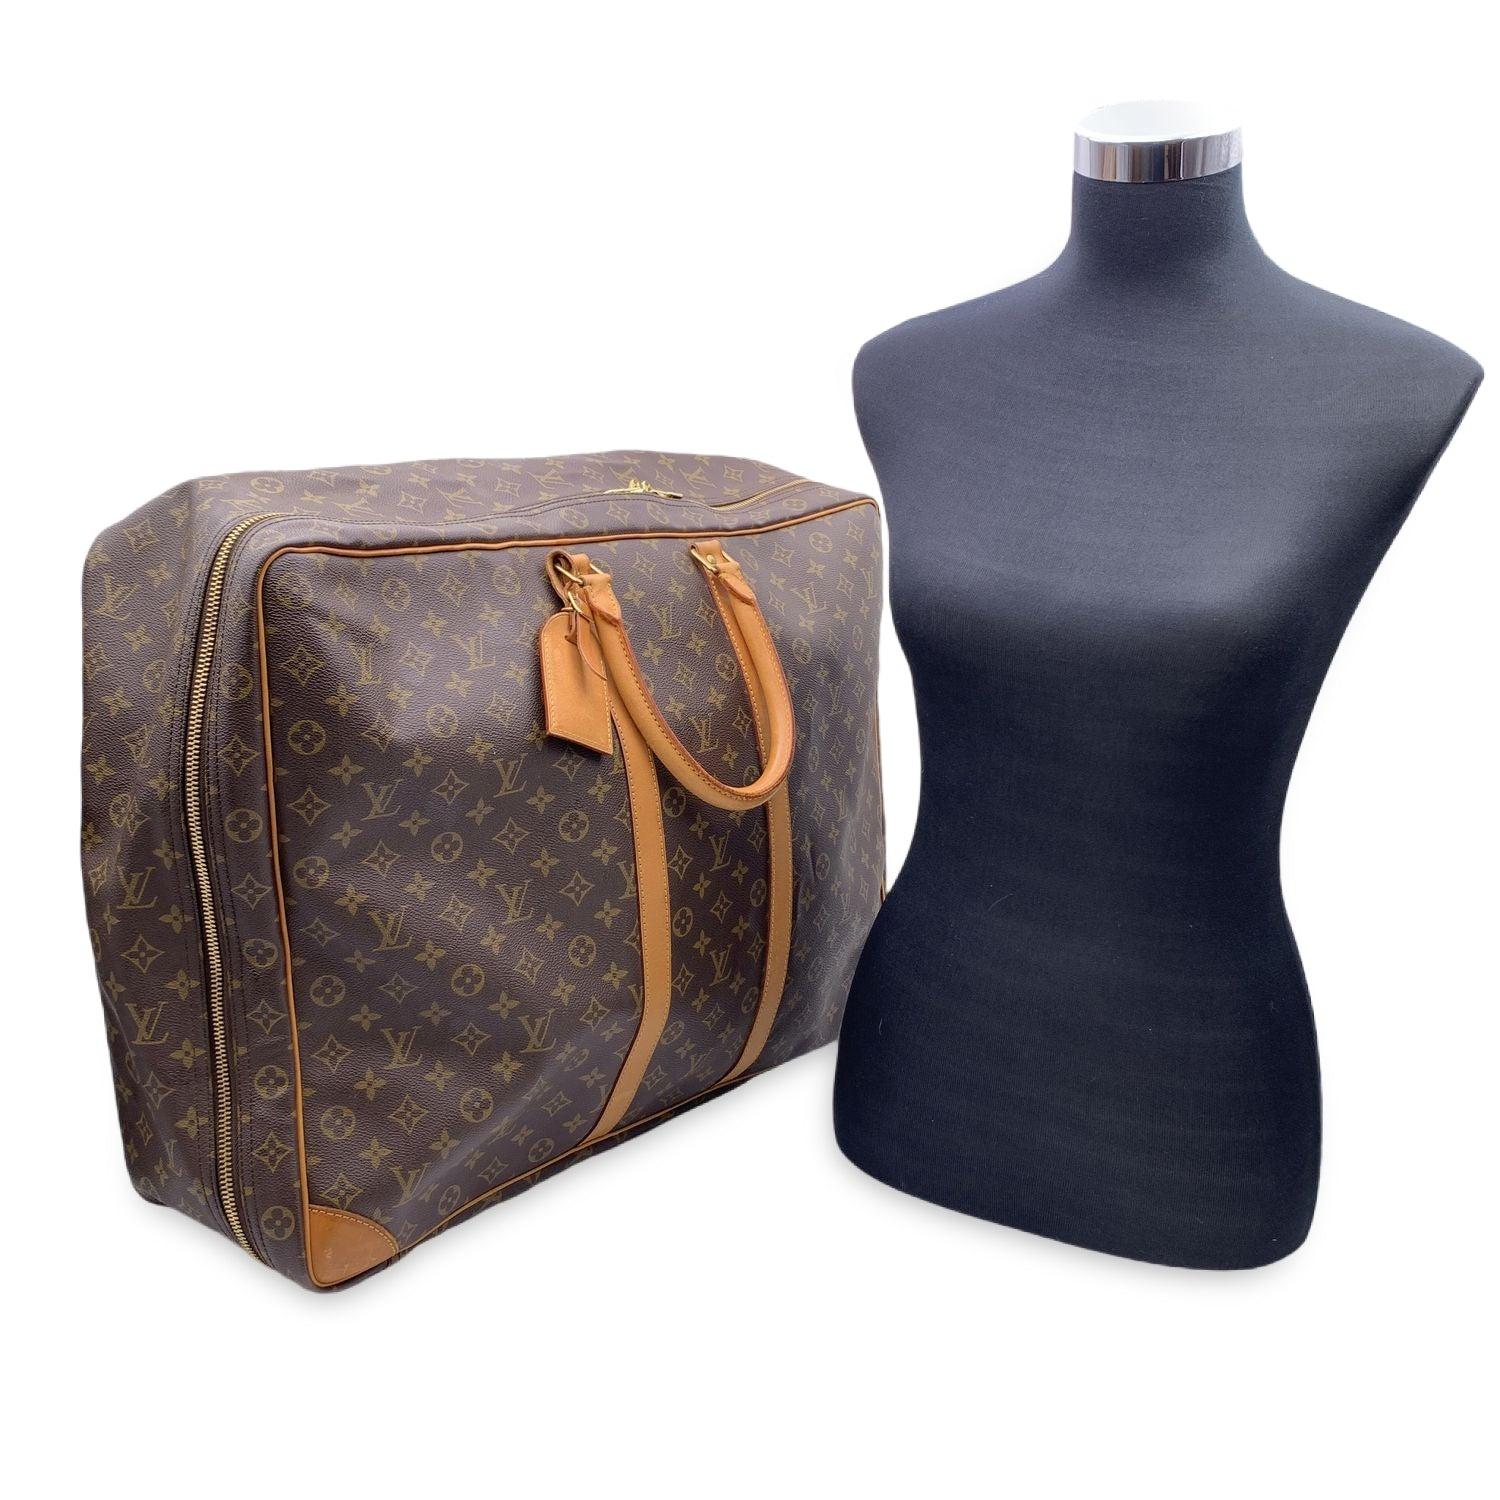 Splendid Louis Vuitton soft-sided SIRIUS 55 suitcase crafted in classic and timeless brown Monogram canvas. It features gold-tone hardware, natural cowhide leather trim and accents, double rolled leather handles and a full double zipper closure.